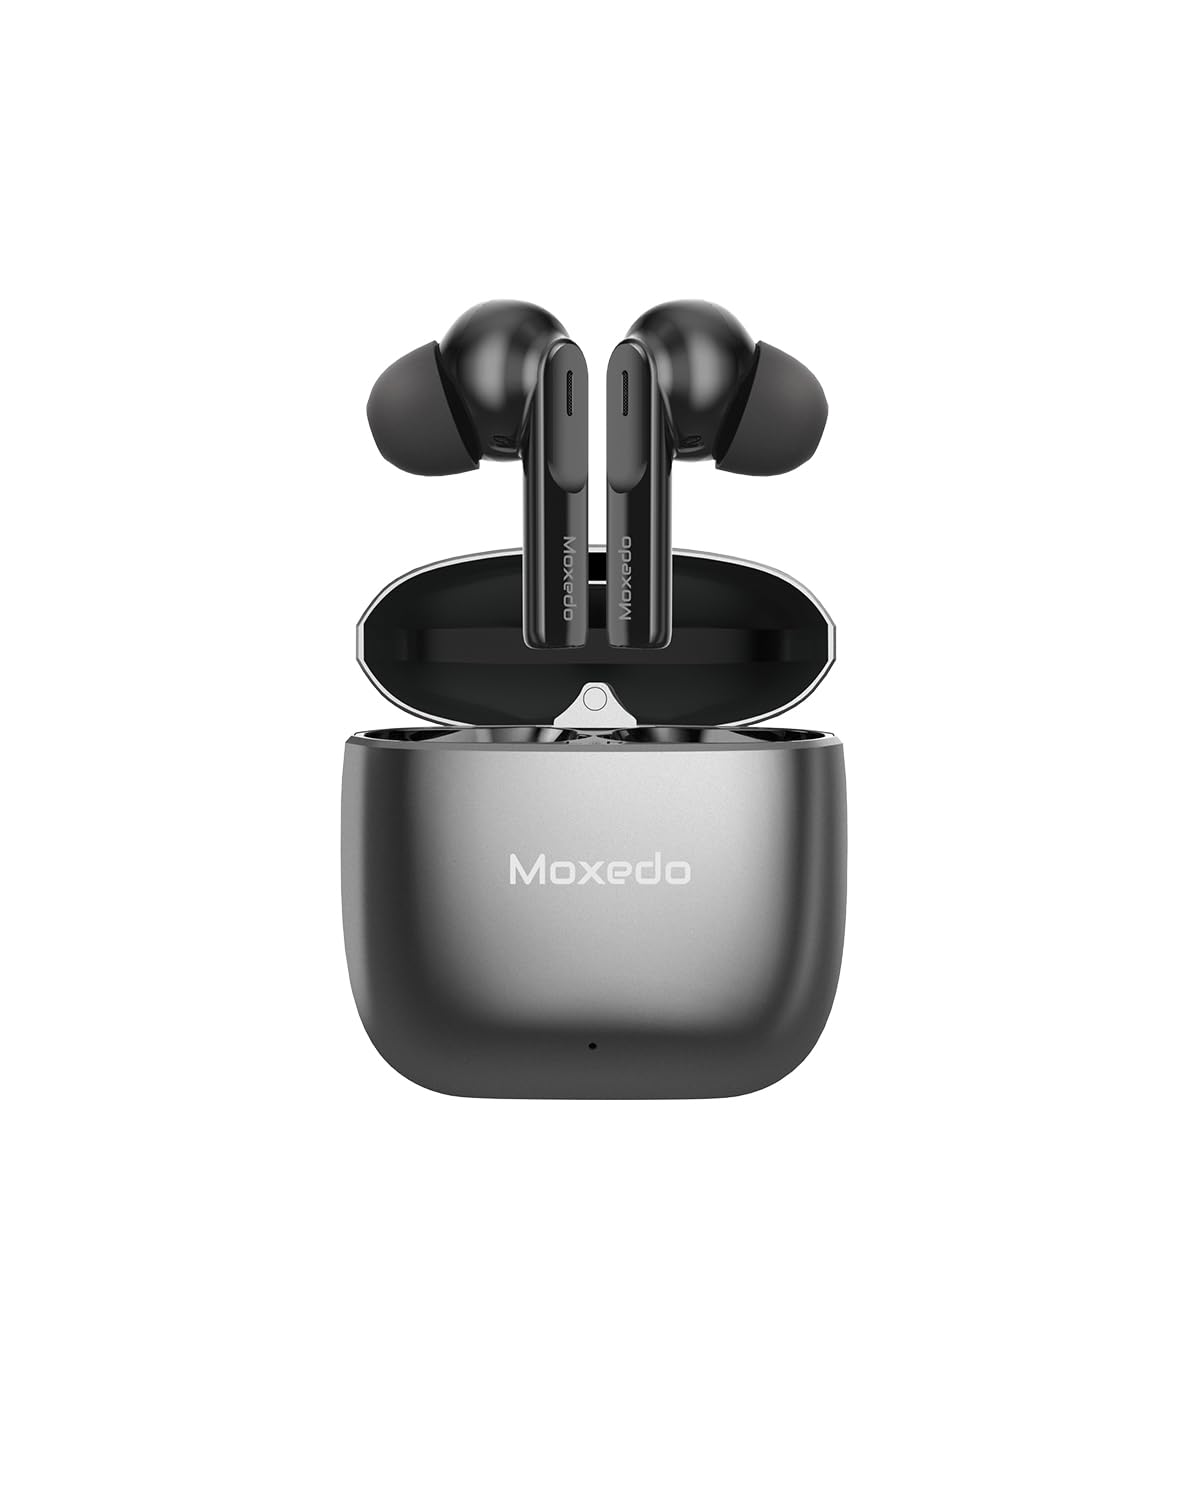 Moxedo True Tunes TWS Wireless Bluetooth Earbuds, Dual Microphone Clear Calls, IPX4 Sweat Resistance Easy Touch Control, ENC Noise Reduction Technology - Gray